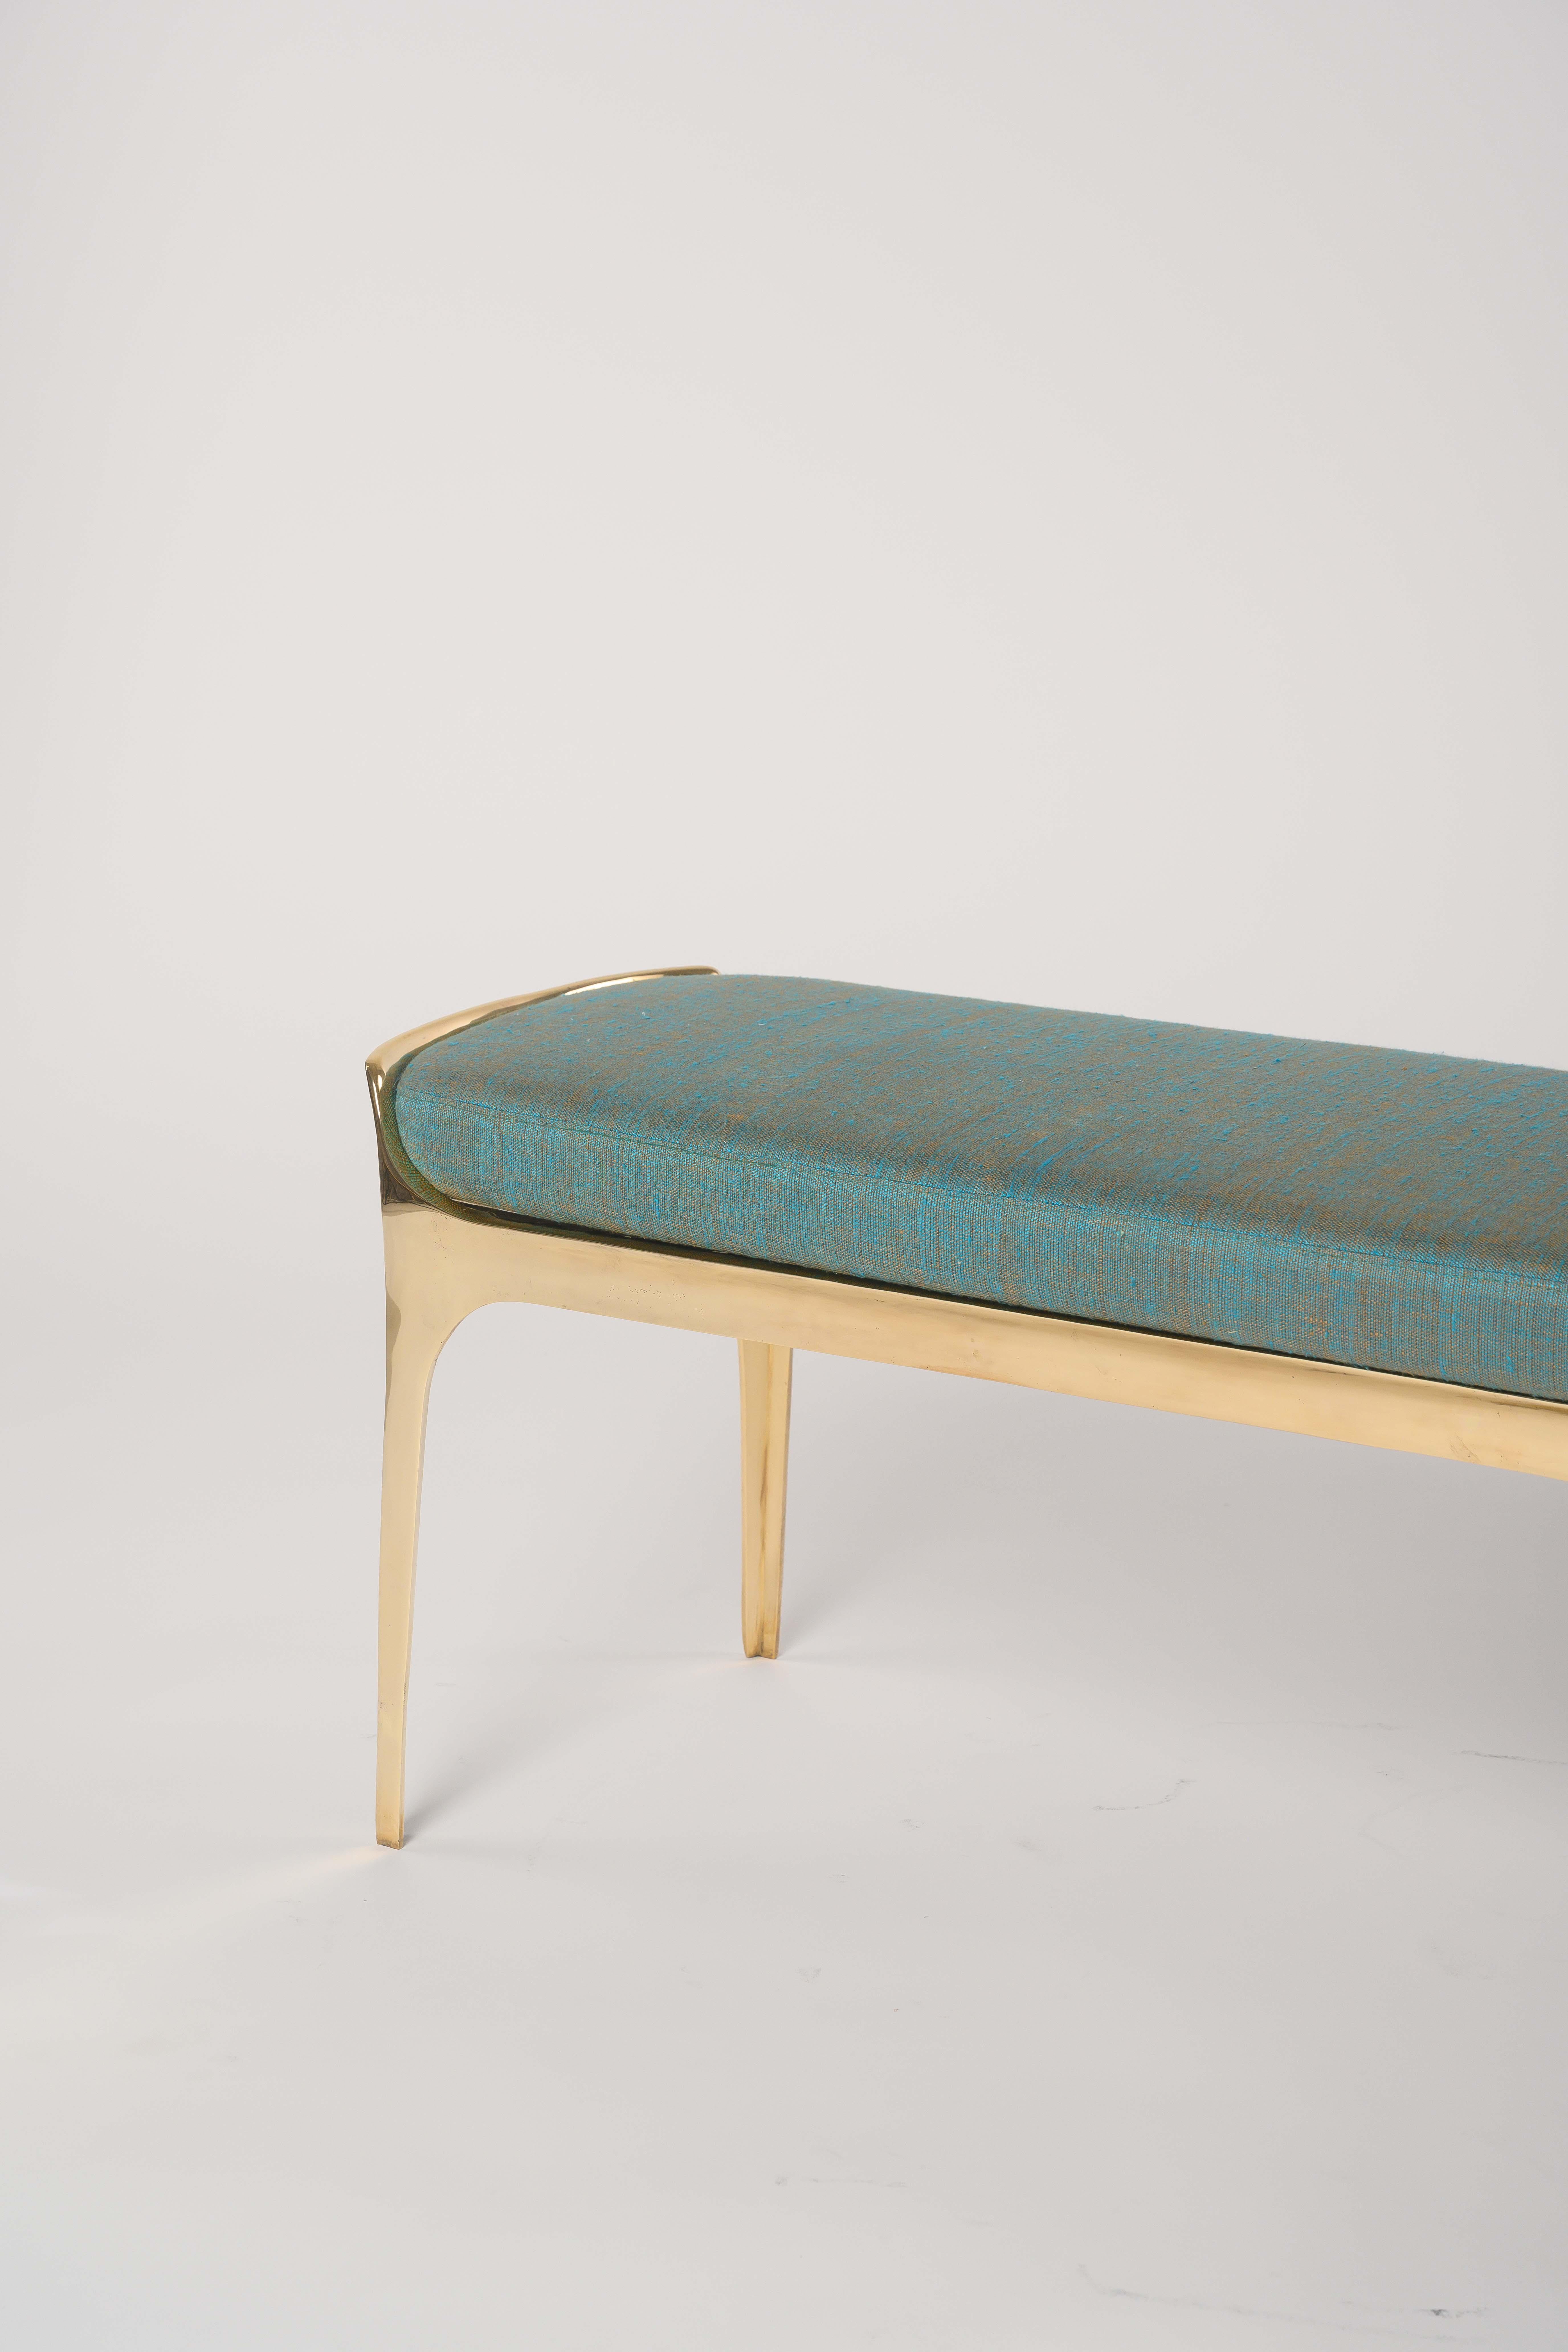 In Stock Cast Bronze Bruda Bench in Polished Gold Bronze by Elan Atelier 2